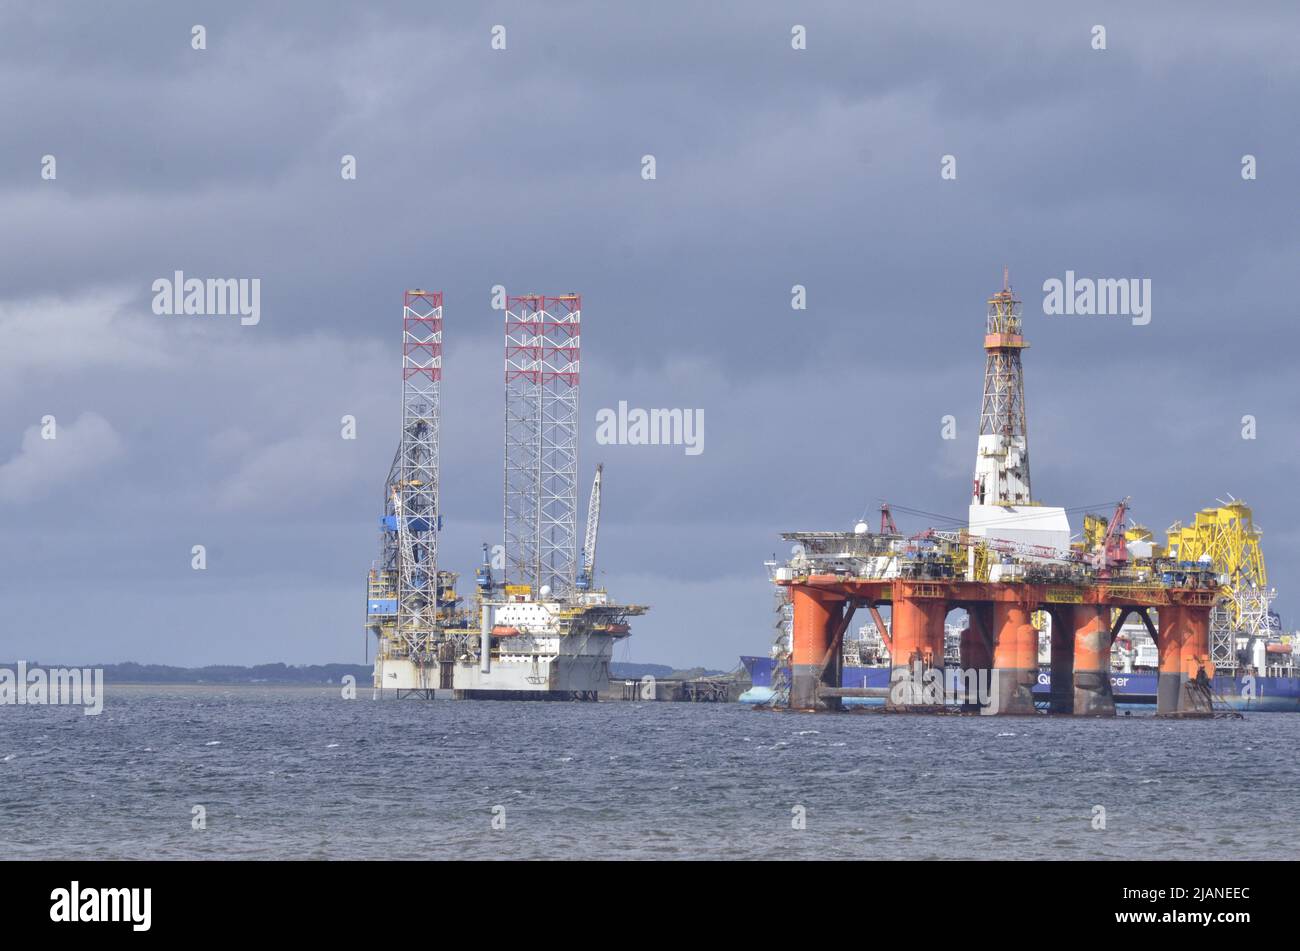 Oil rigs off the yard at Nigg, Cromarty Firth, Scotland, UK Stock Photo